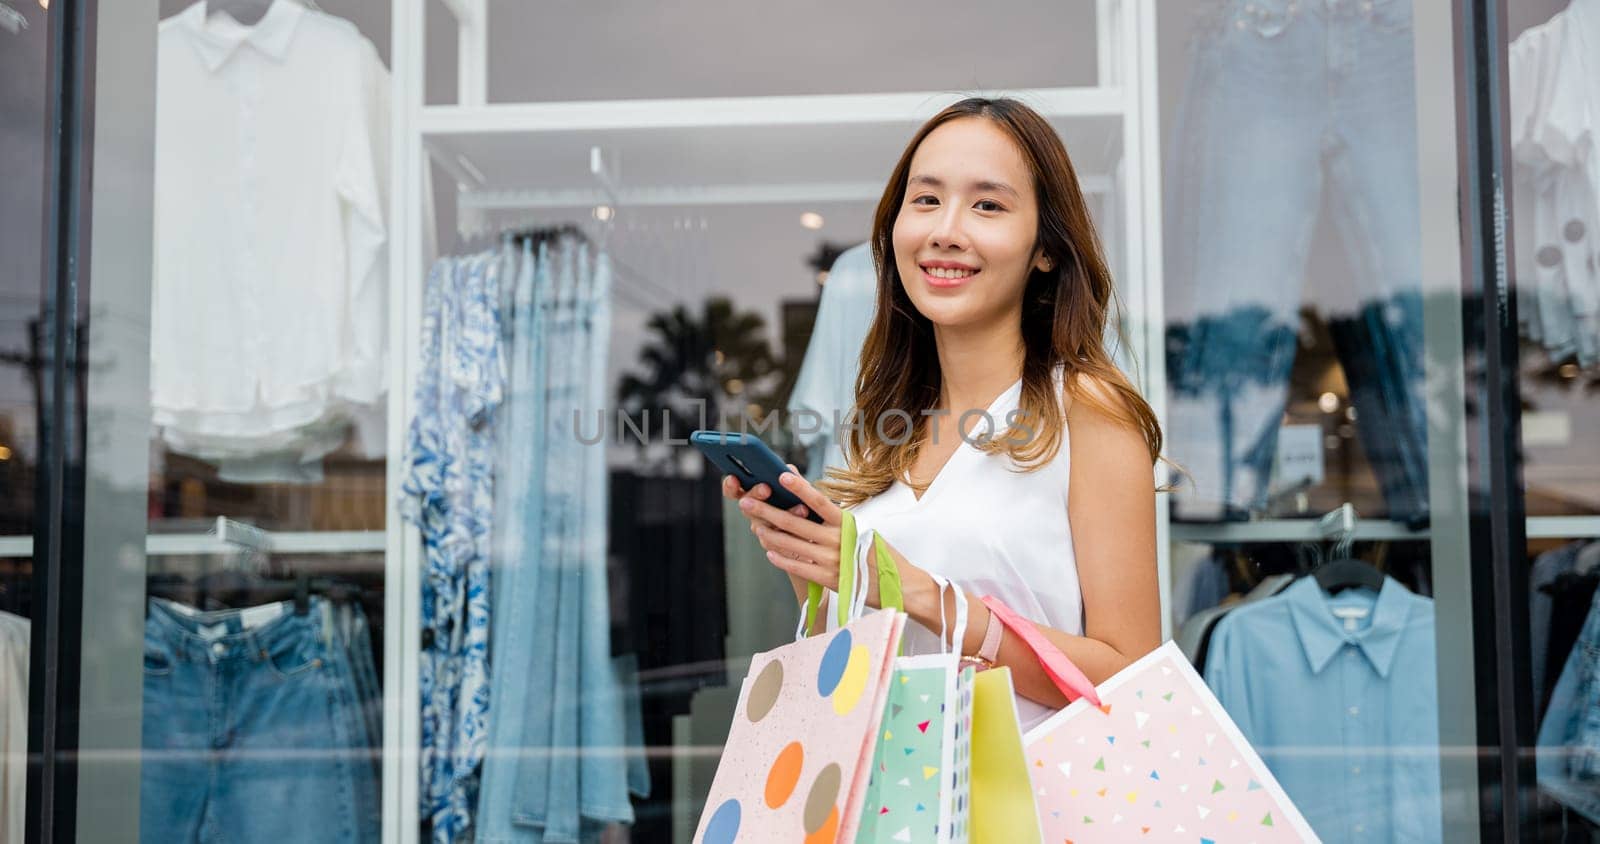 woman holding shopping bags and a cellphone smiles in front of a store window by Sorapop